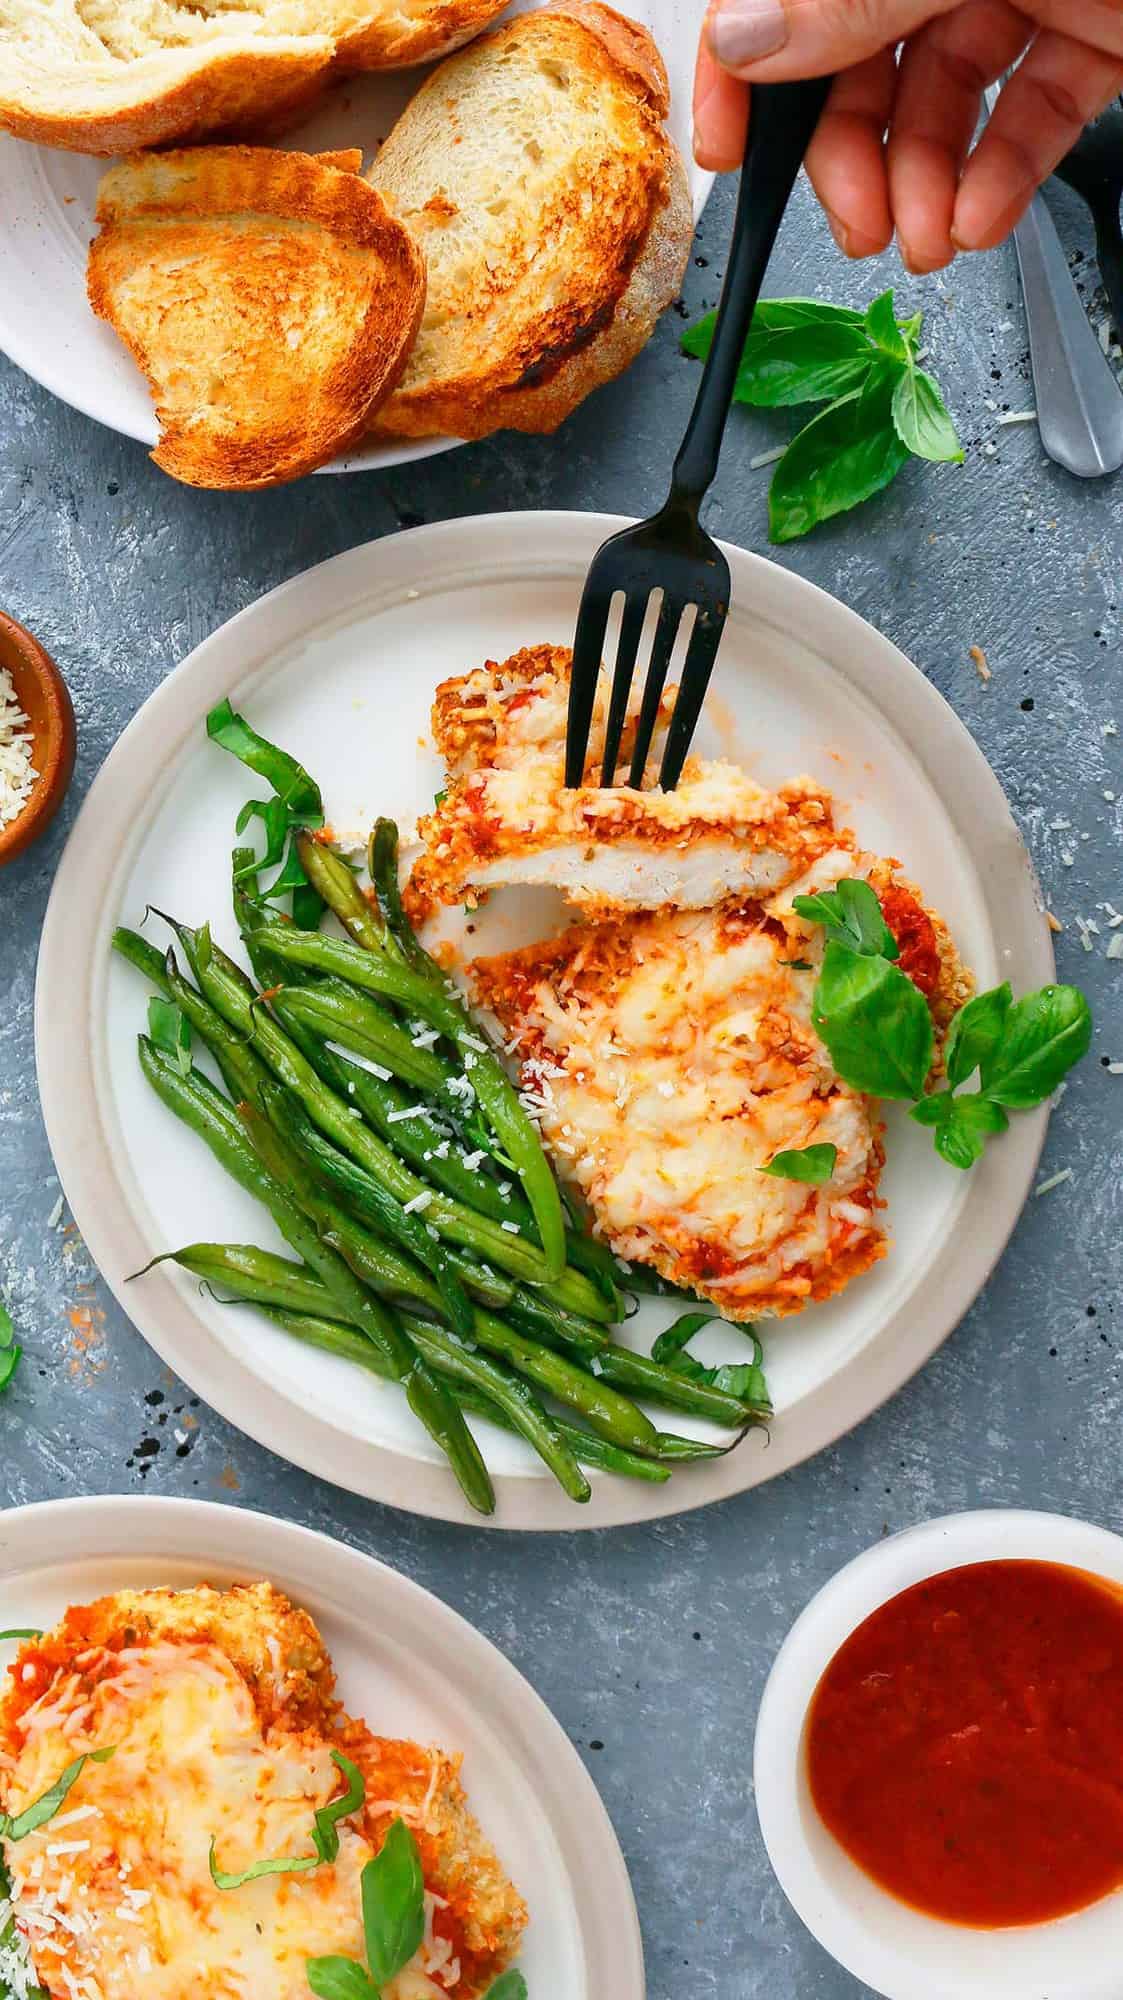 parmesan chicken made in air fryer served on white plates along with green beans